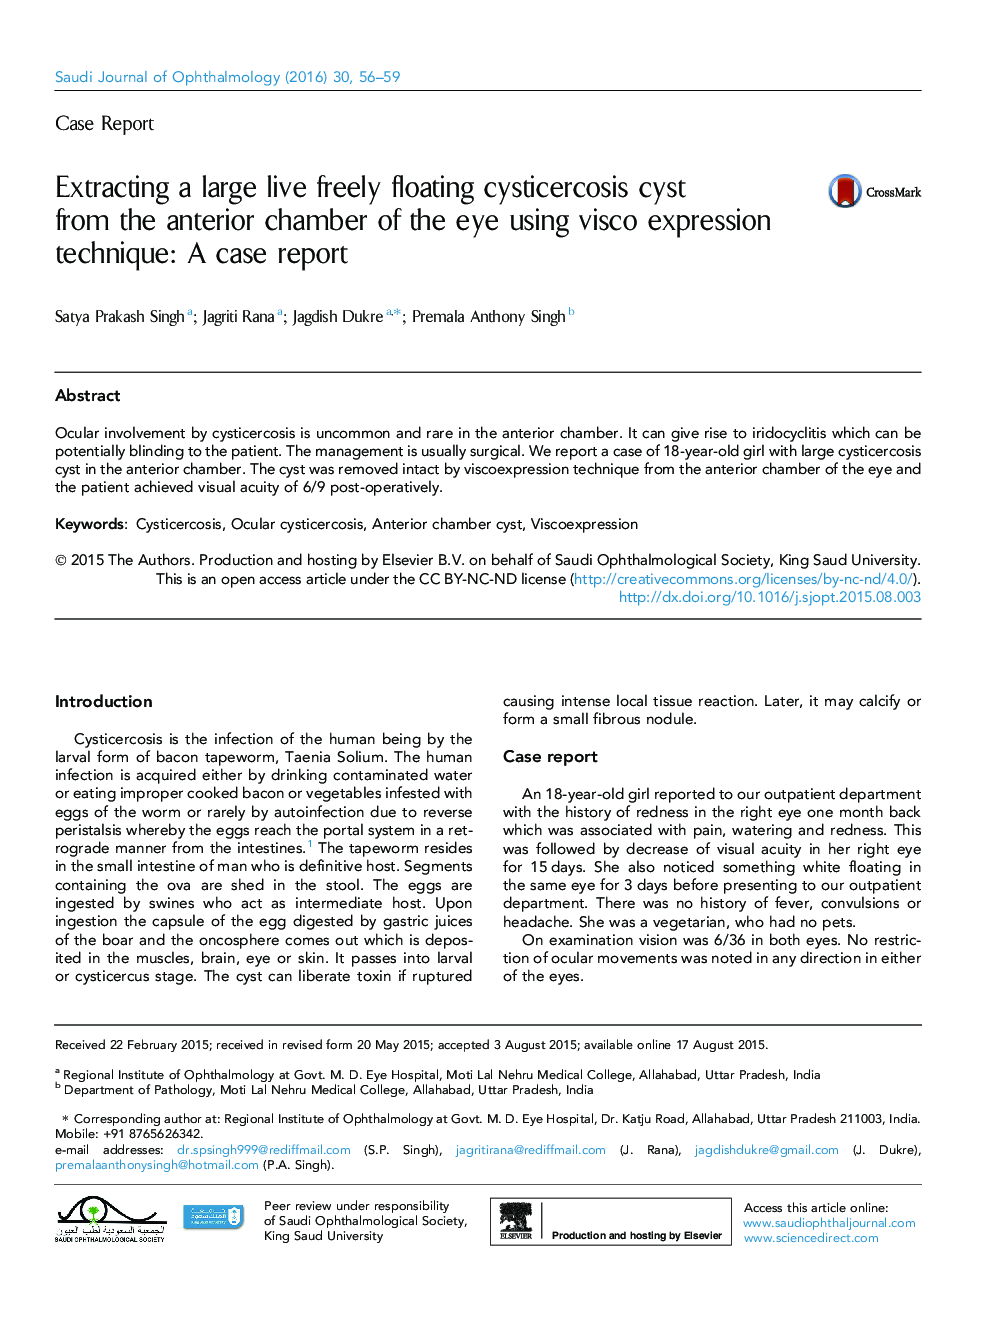 Extracting a large live freely floating cysticercosis cyst from the anterior chamber of the eye using visco expression technique: A case report 